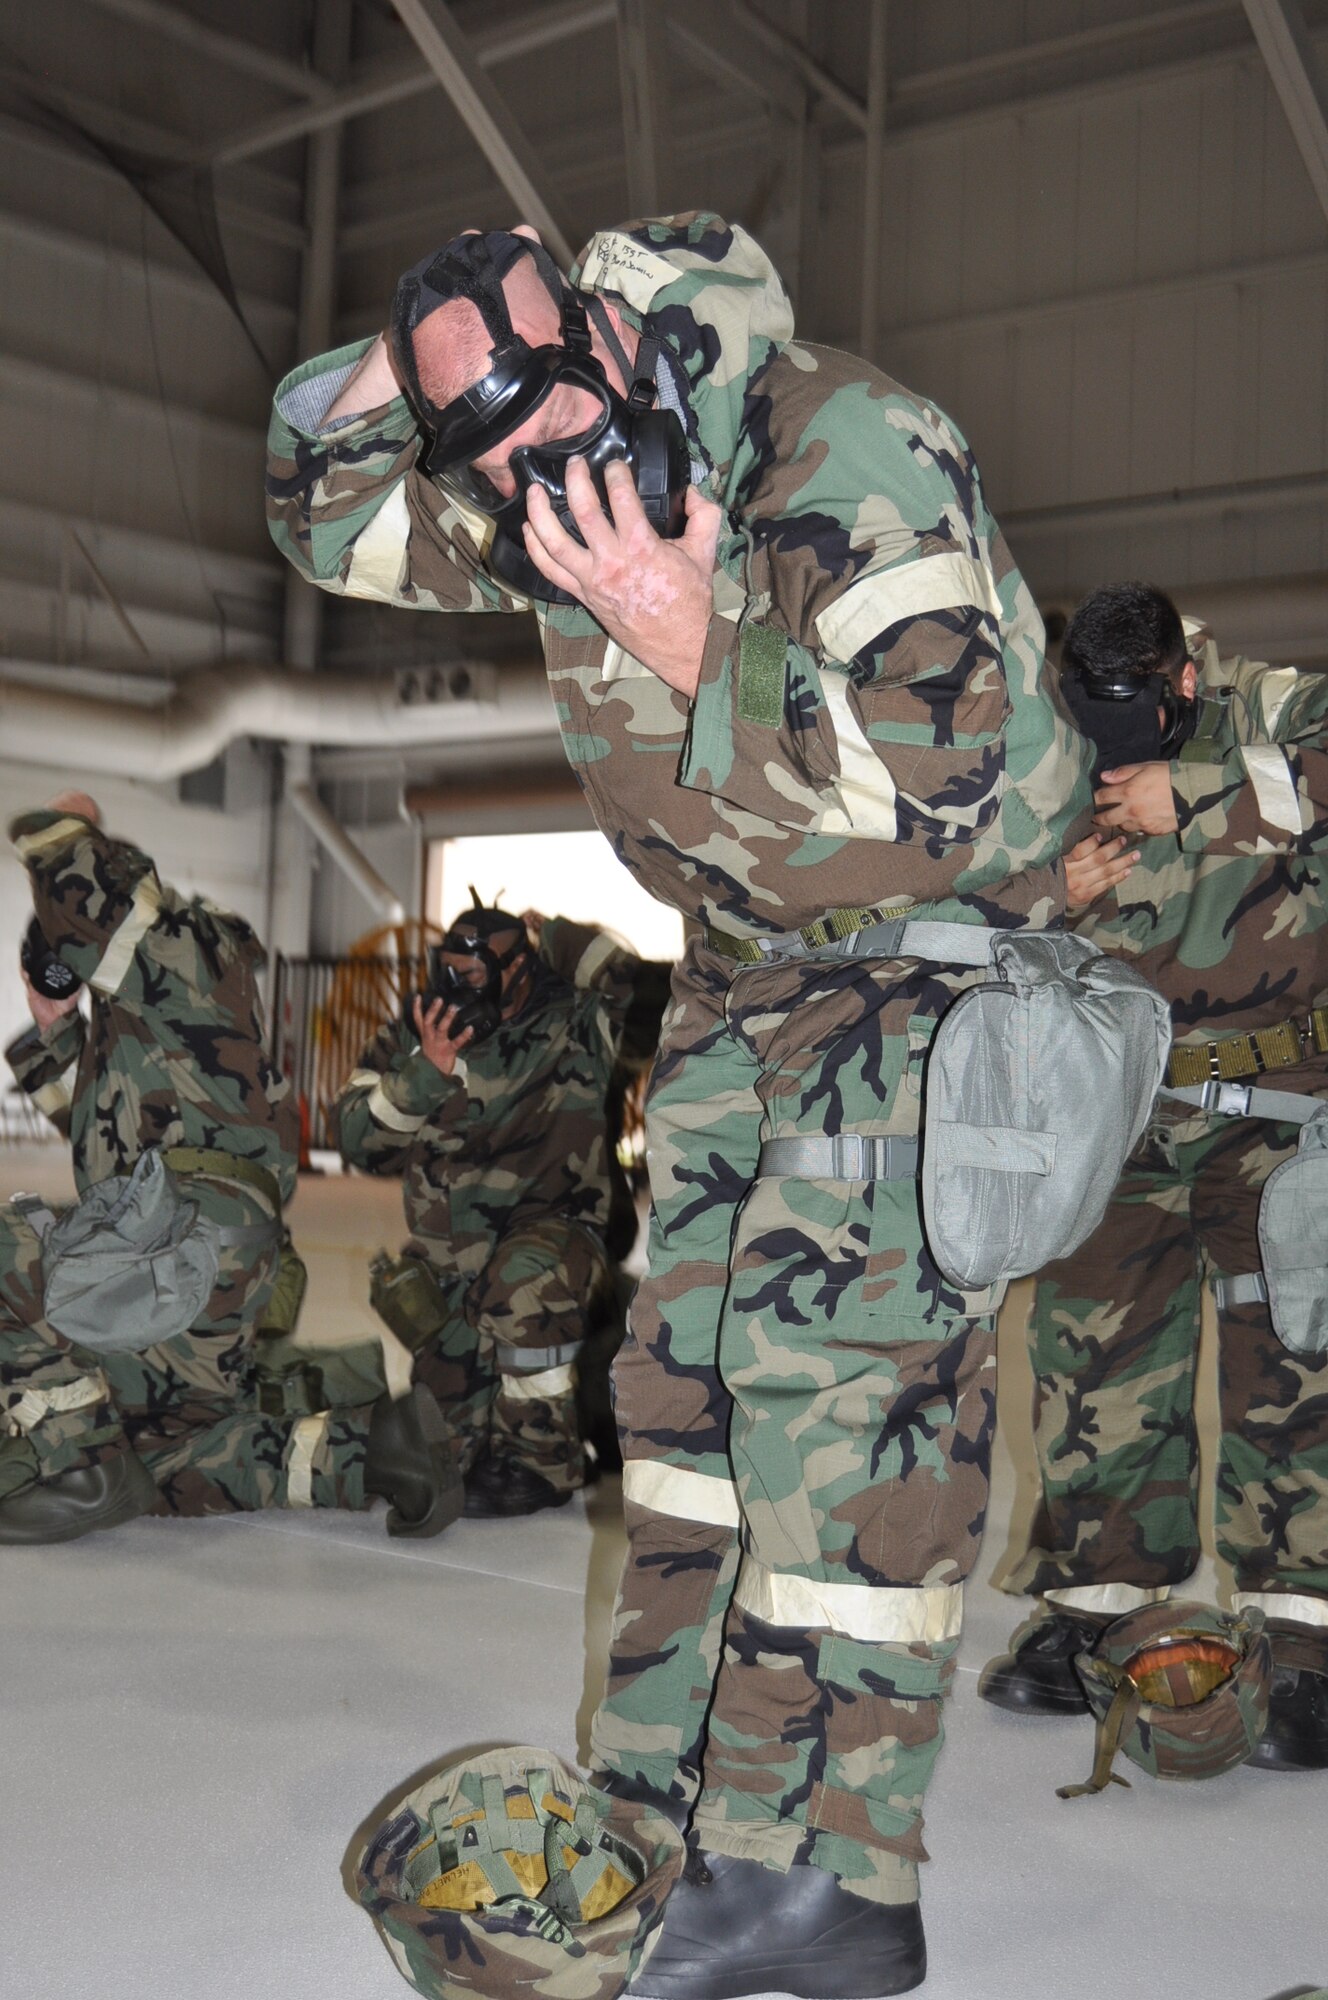 Tech Sgt. Ben Reid, 433rd Aircraft Maintenance Squadron crew chief, dons his gas mask during an Ability to Survive and Operate training exercise along the flight line on Joint Base San Antonio-Lackland, Texas on Nov. 18, 2017. The focus of the training was geared toward responding to chemical, biological, radiological and nuclear threats in a deployed environment.  (U.S. Air Force photo/Senior Airman Bryan Swink)